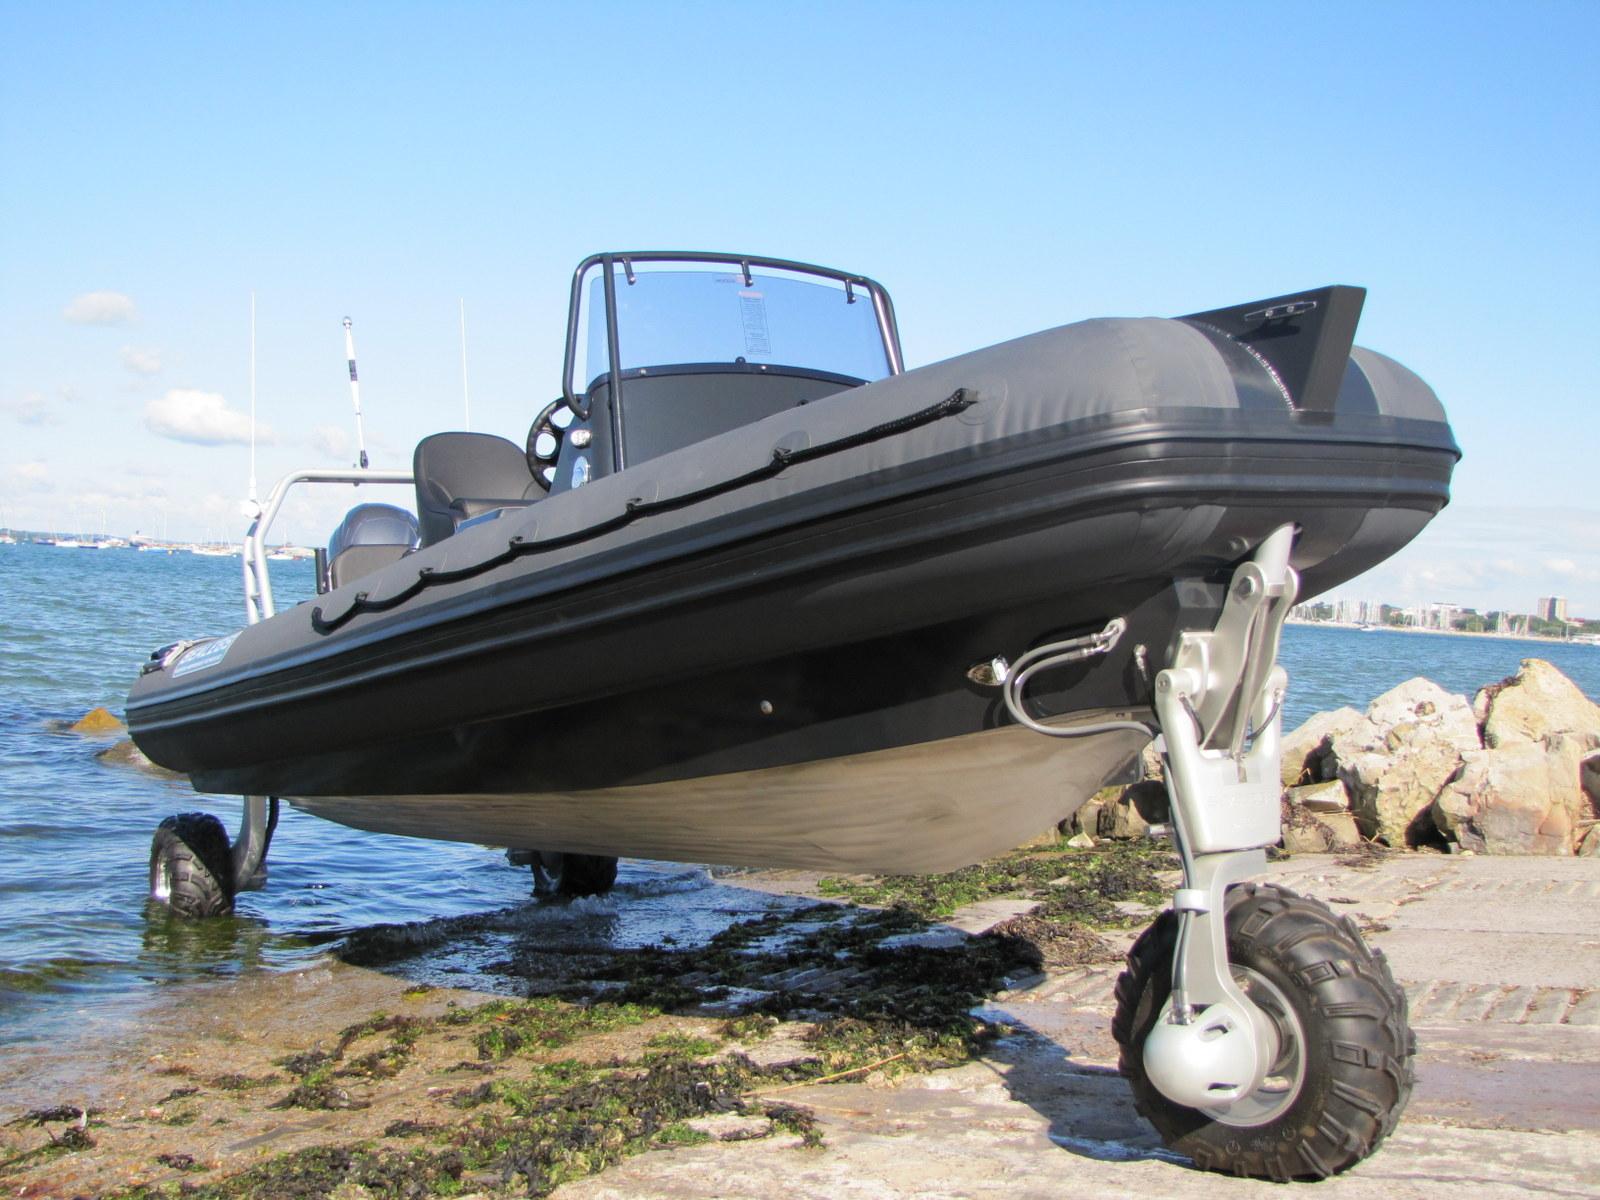 A 2015 Sealegs 7.7. Amphibious Rib for sale on YachtWorld by Salterns Brokerage in Poole, Dorset, UK.